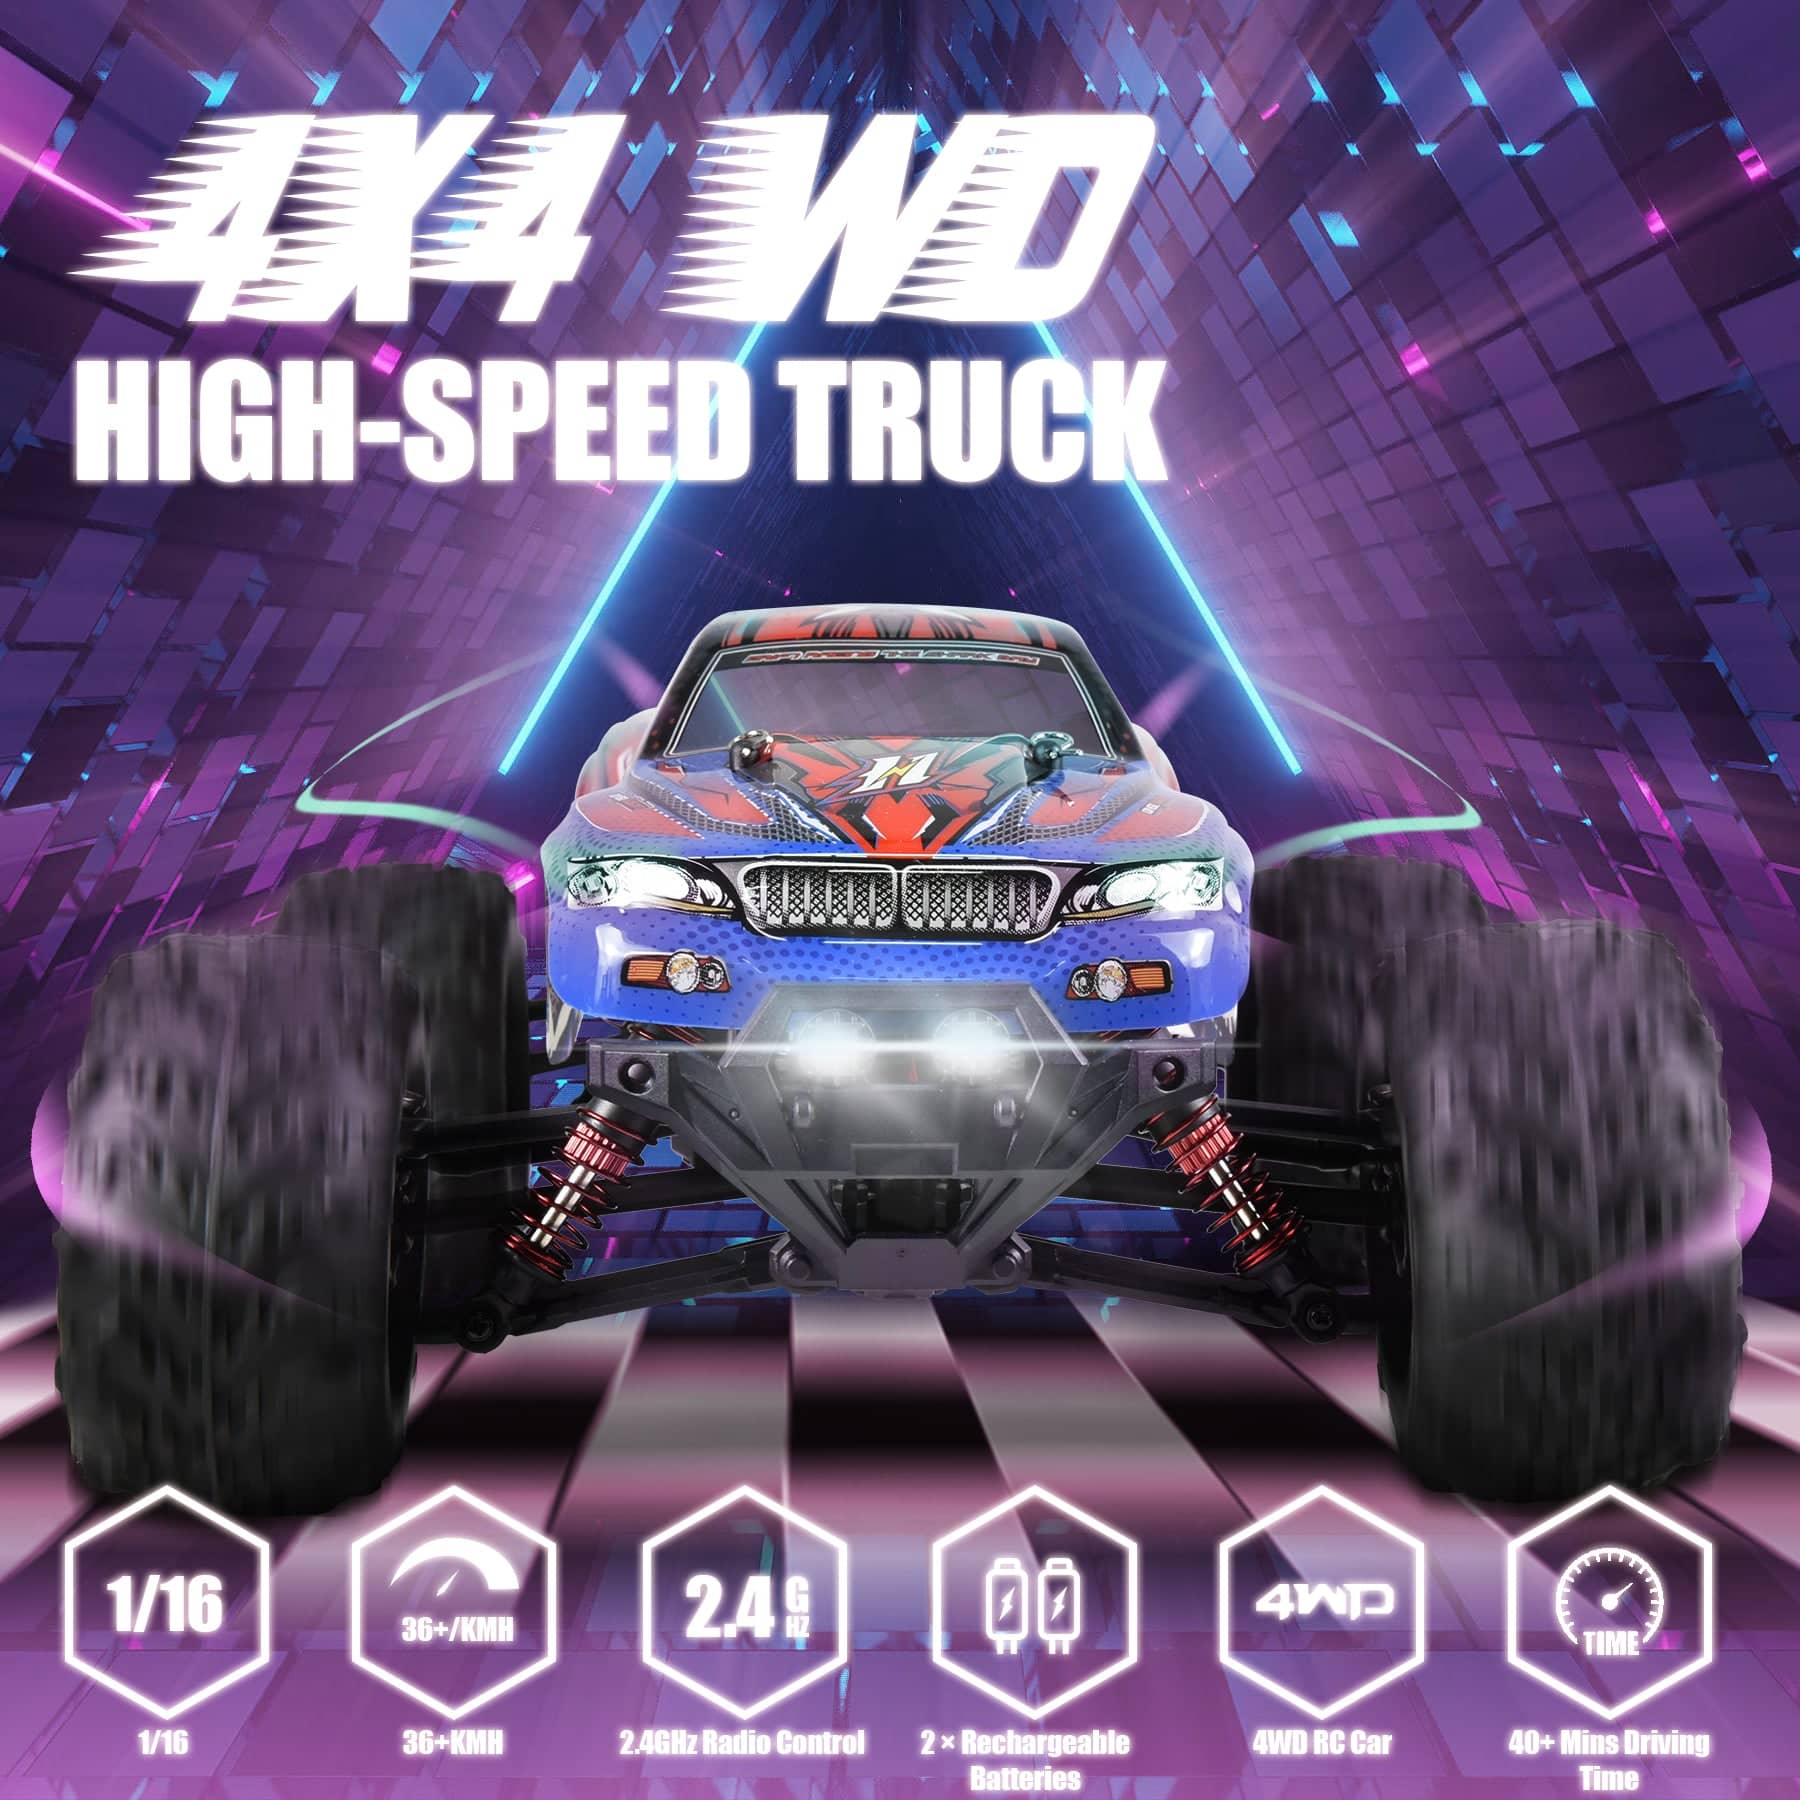 1:14 Scale All Terrain RC Cars, High Speed 4WD Remote Control Car with  Rechargeable Batteries, 4X4 Off Road Monster RC Truck, 2.4GHz Electric  Vehicle